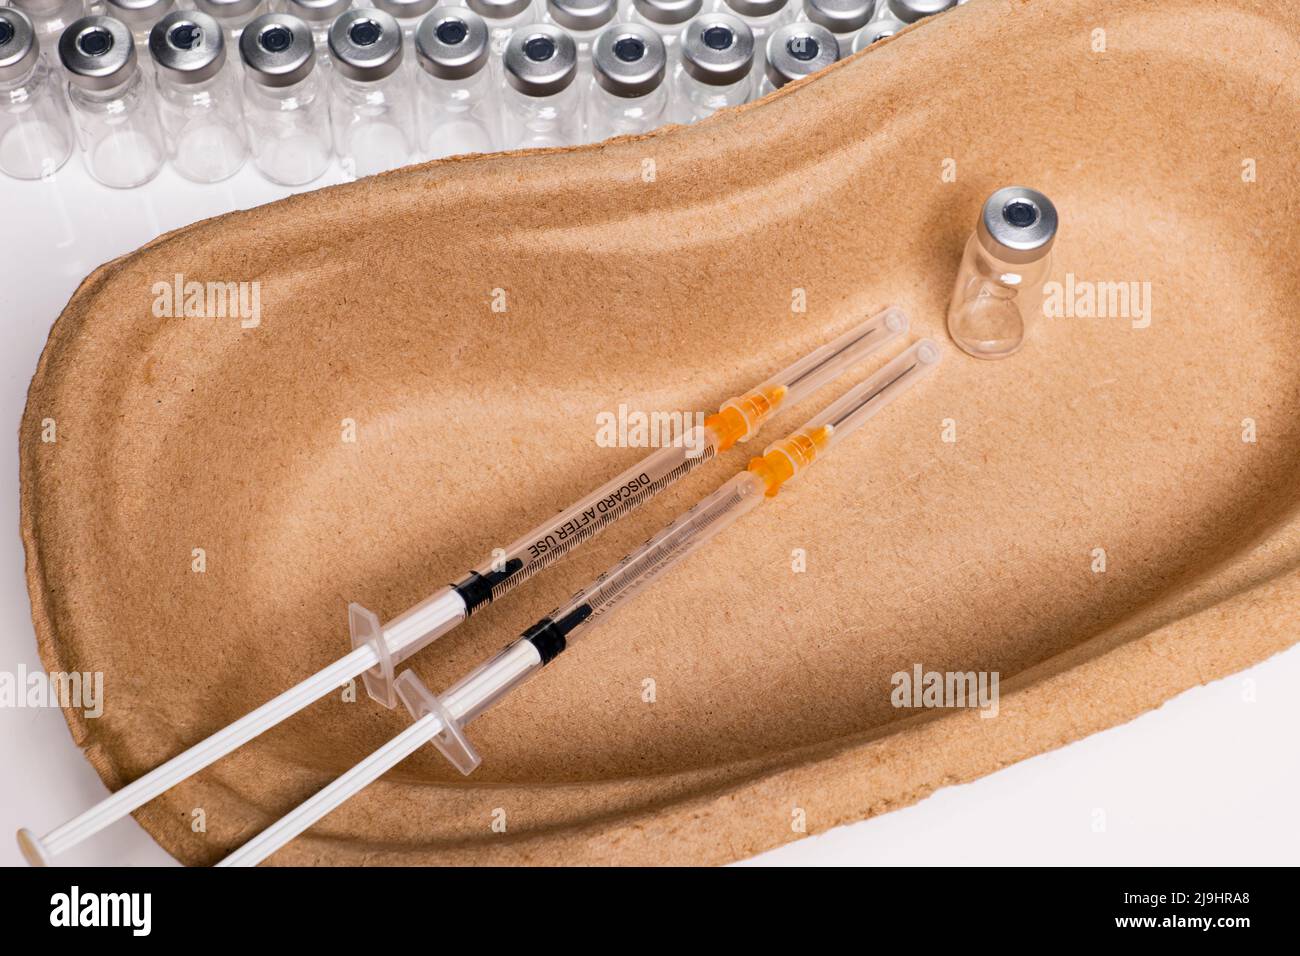 Two injection cutlery in a kidney shell against a background of ampoules Stock Photo